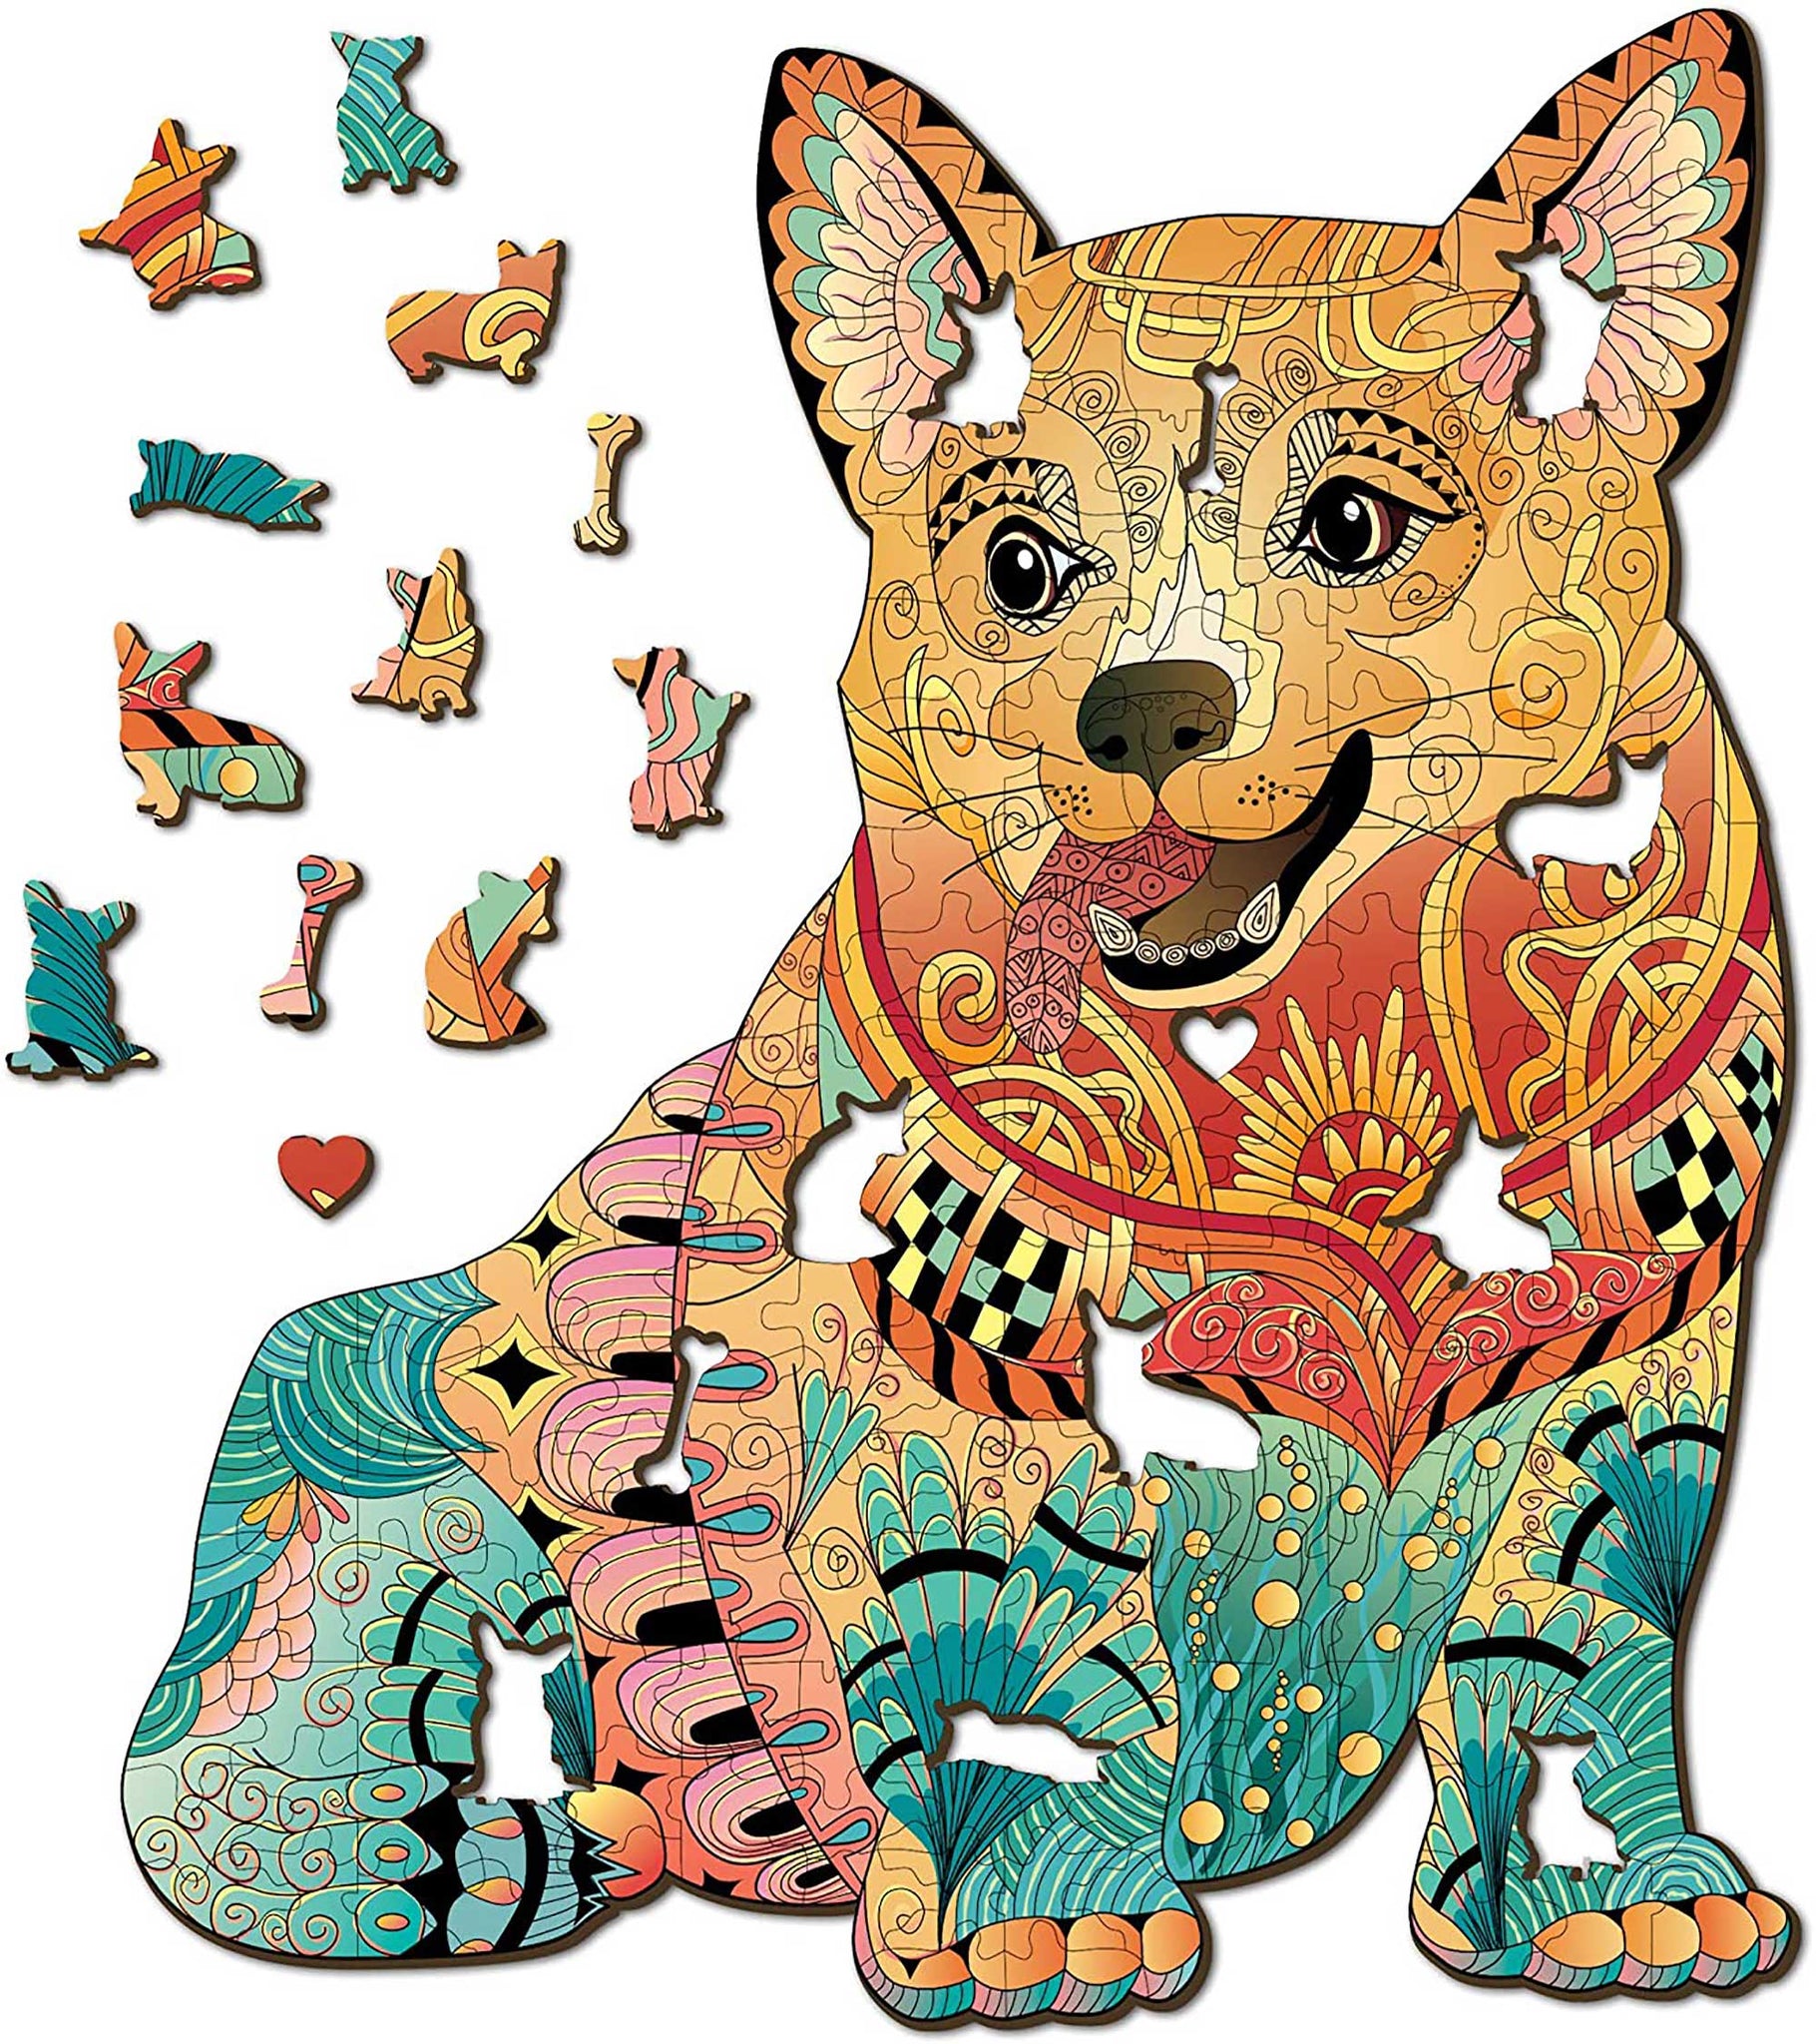 Starry Sky Corgi Puzzles 70 Pieces - Oil Art Animal Wooden Jigsaw Puzzles  for Adults, Each Piece is Unique, for Your Family - for Home Decor Or